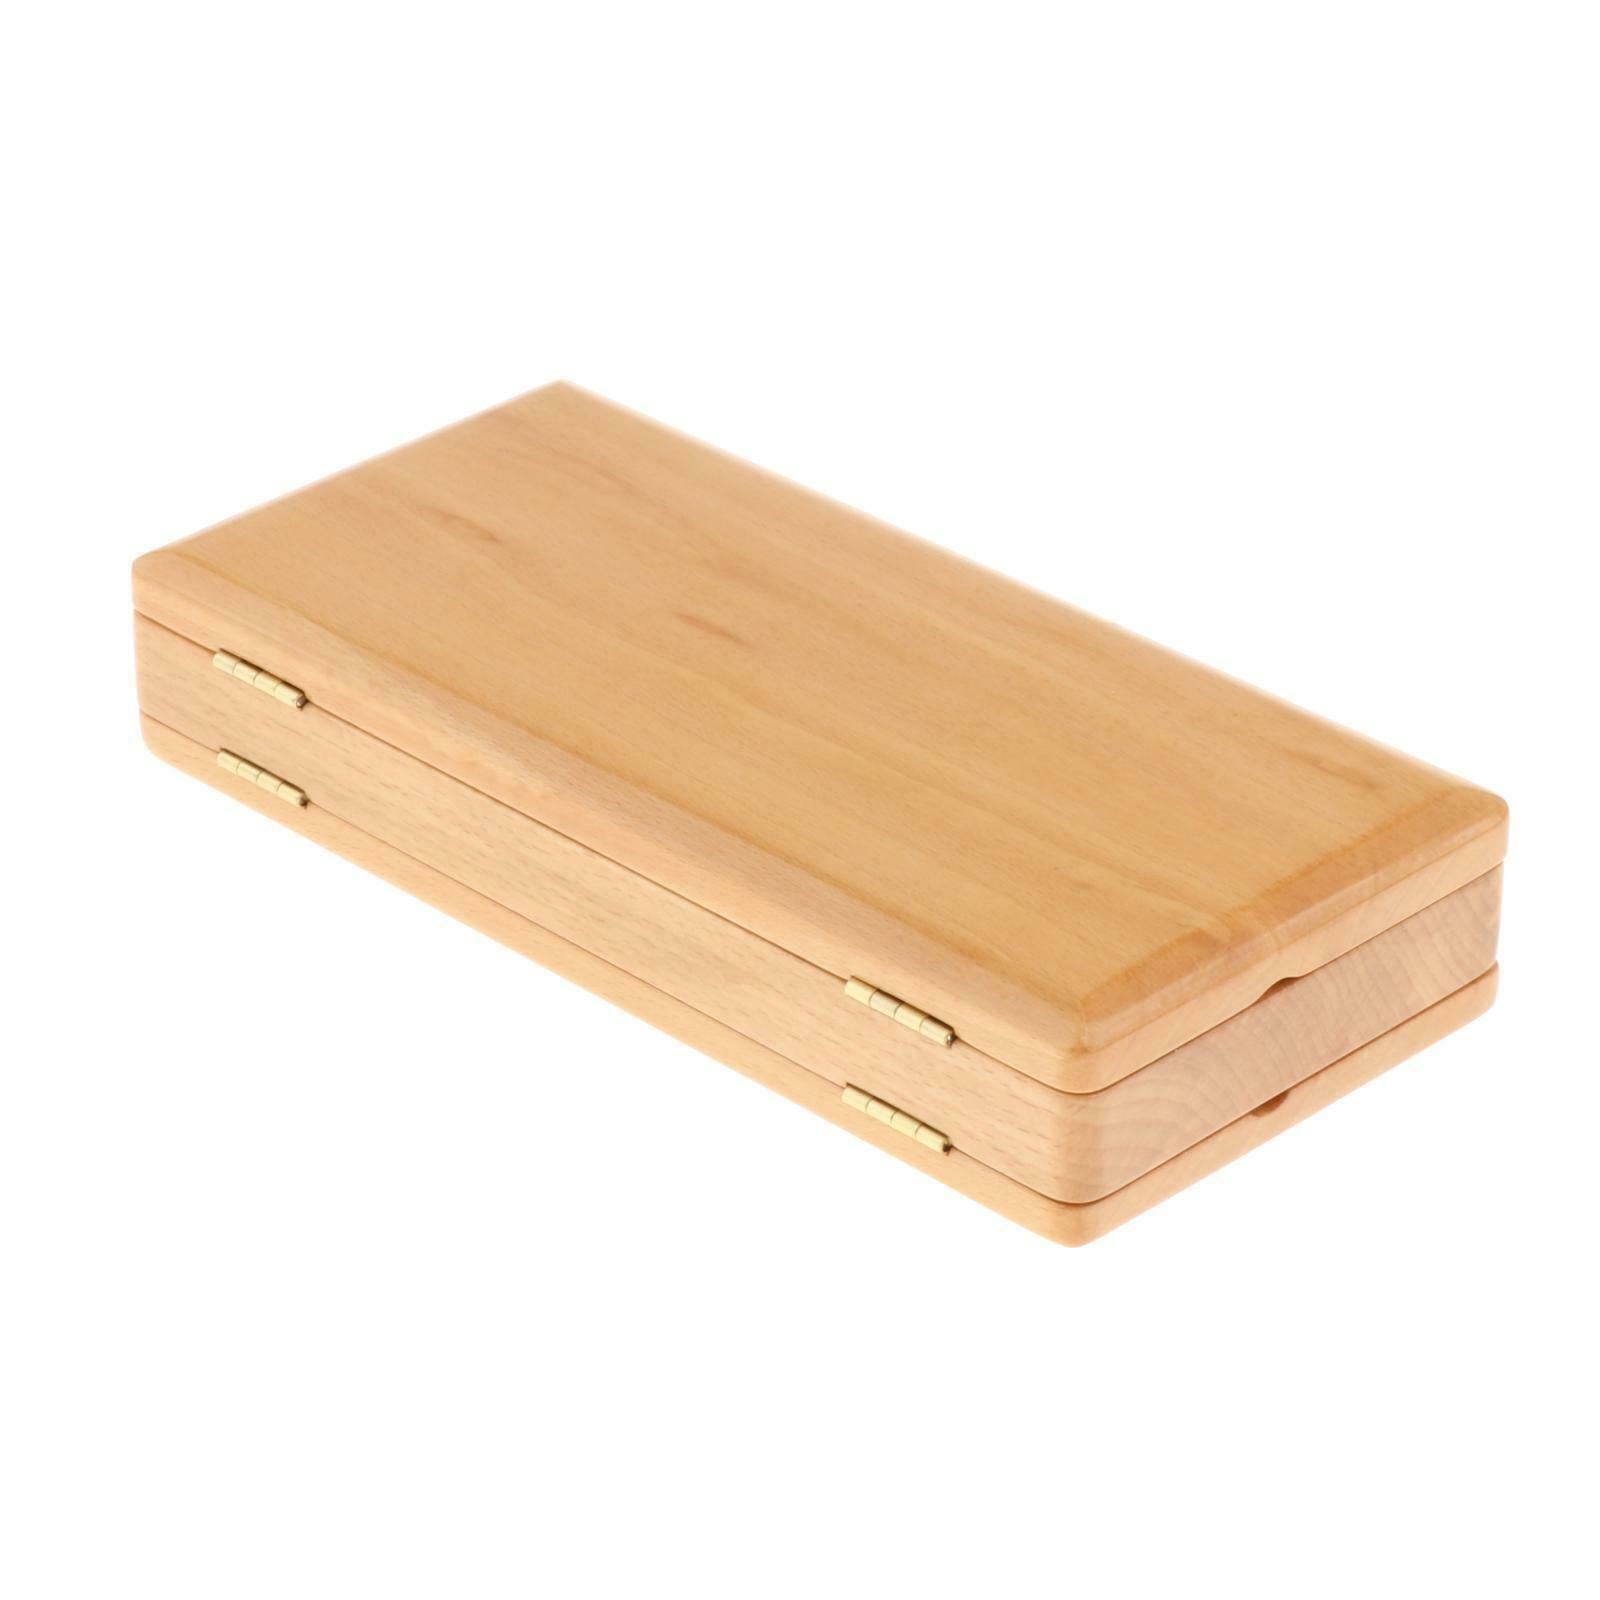 Portable Oboe Reed Case Wooden for Bassoon Reeds 40pcs Capacity 20x9.3x3.7cm